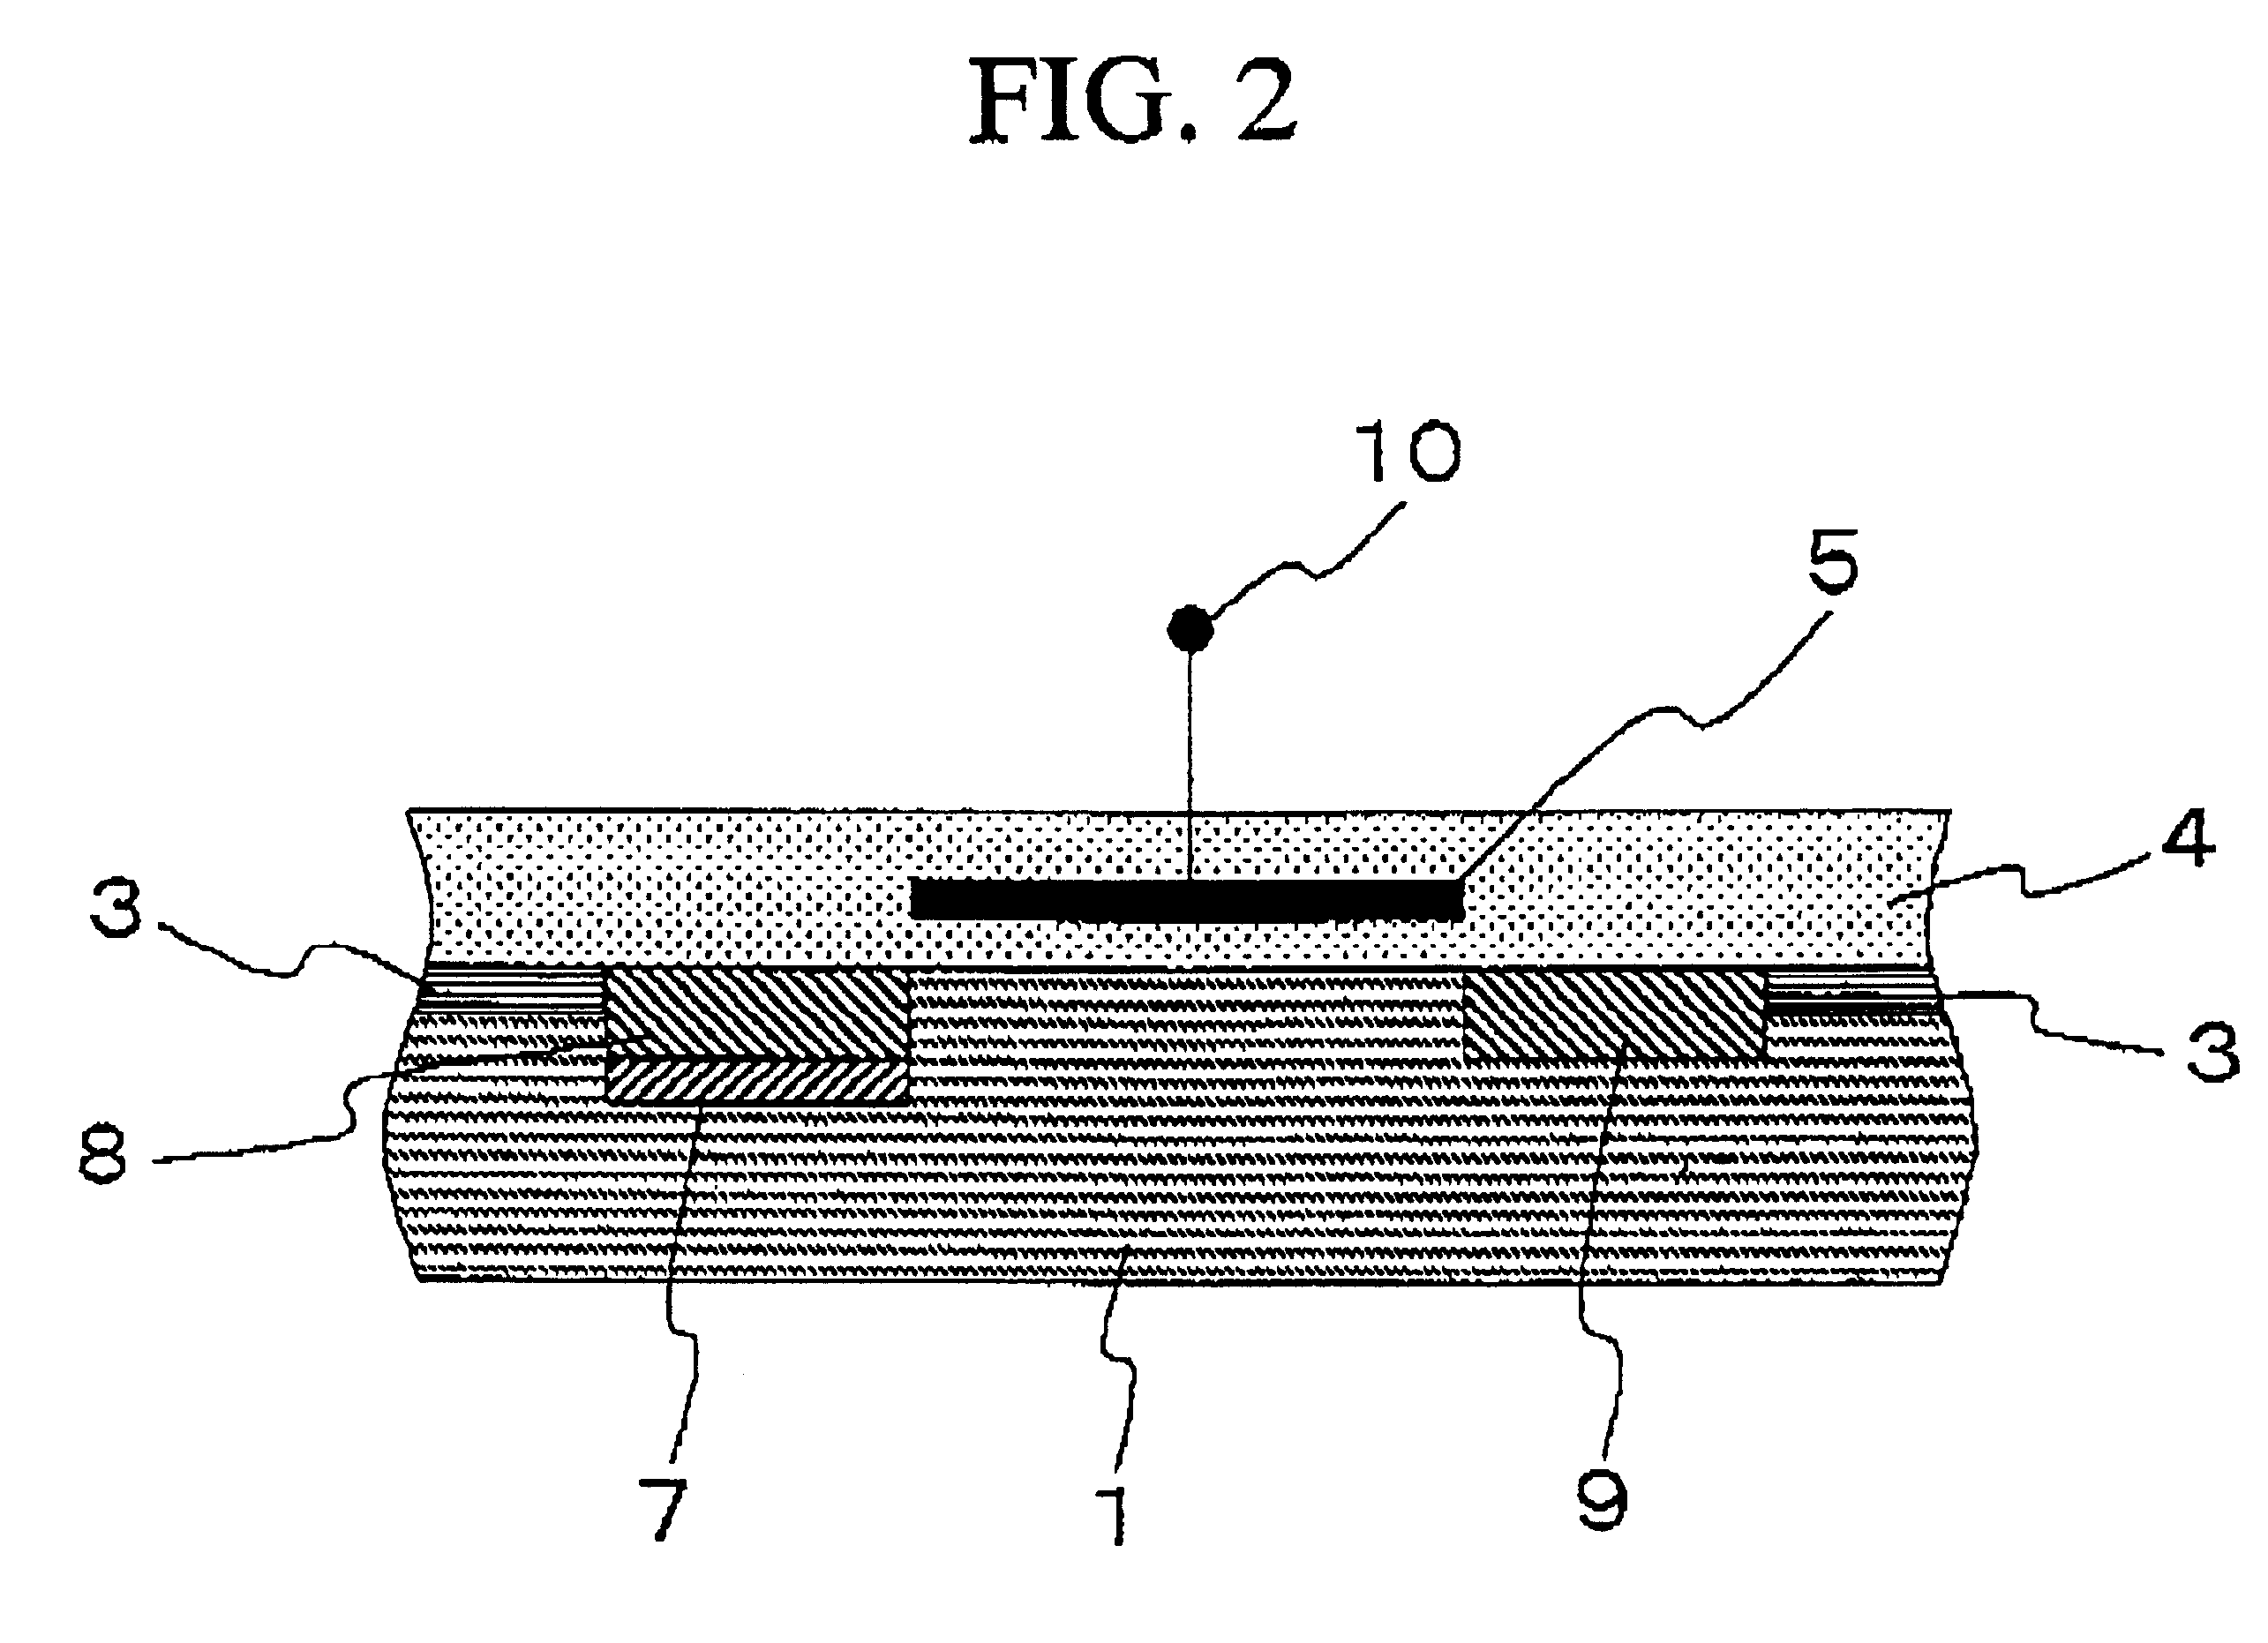 Solid-state image sensor with reduced smear and noise